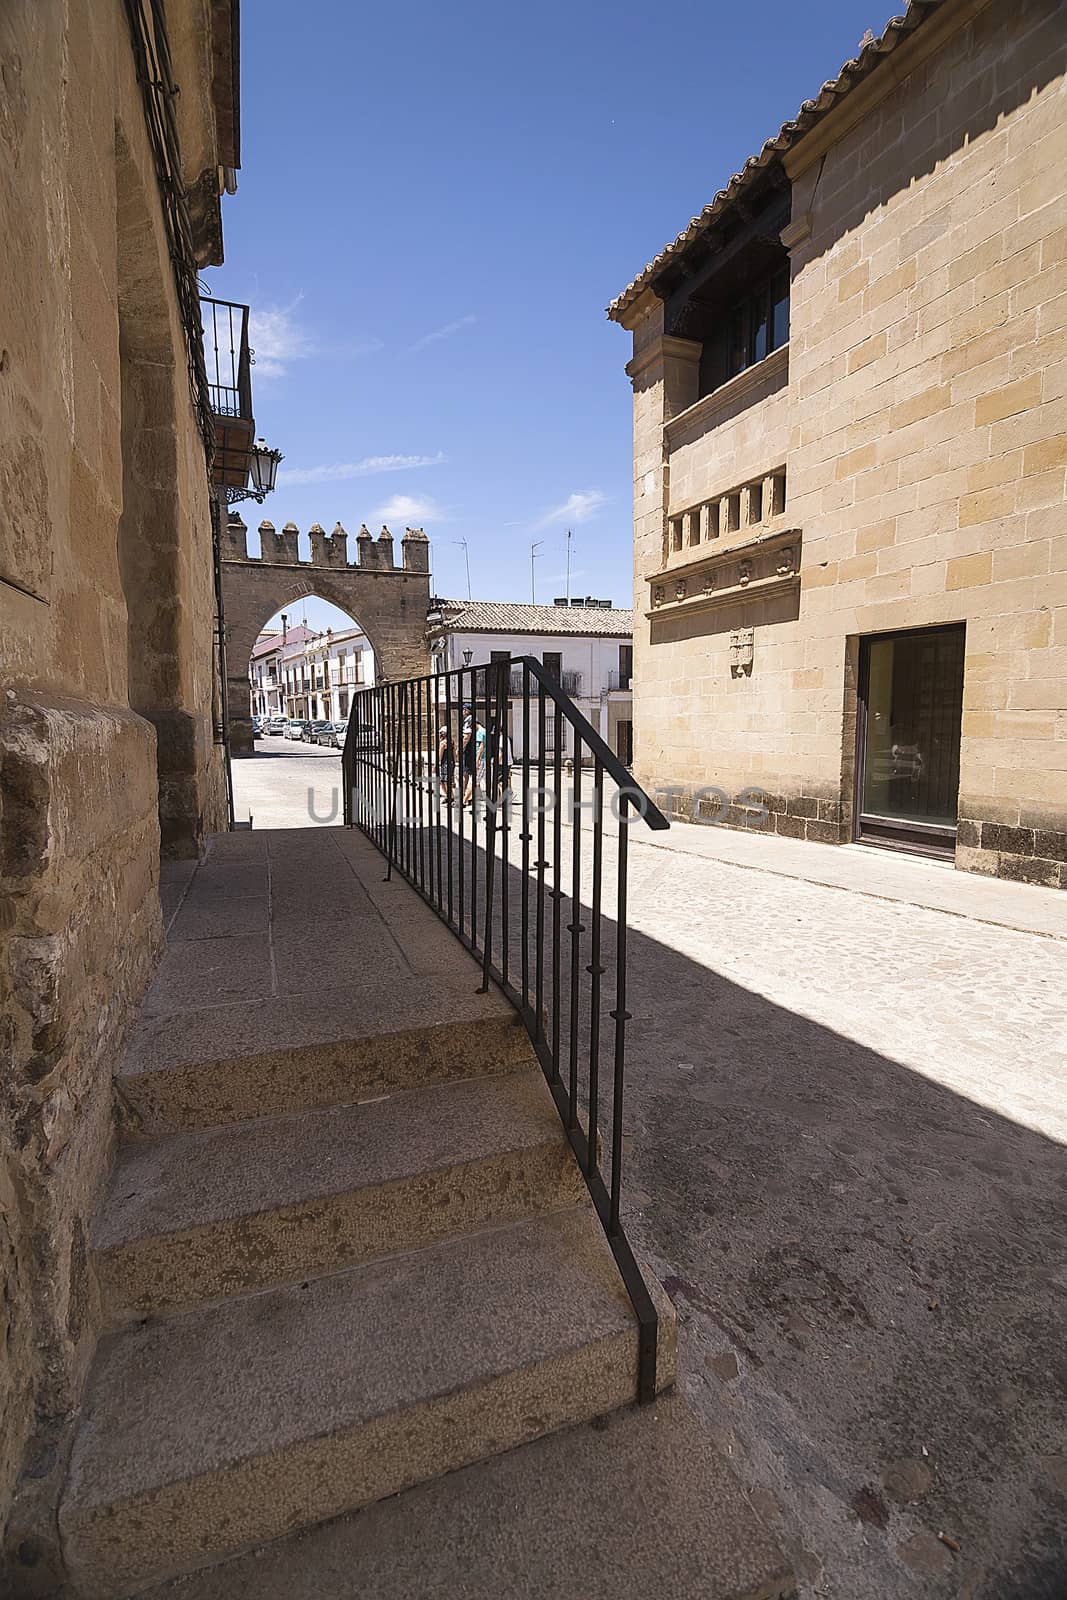 Stairs near the door of Jaen in Baeza, Jaen province, Andalusia, Spain